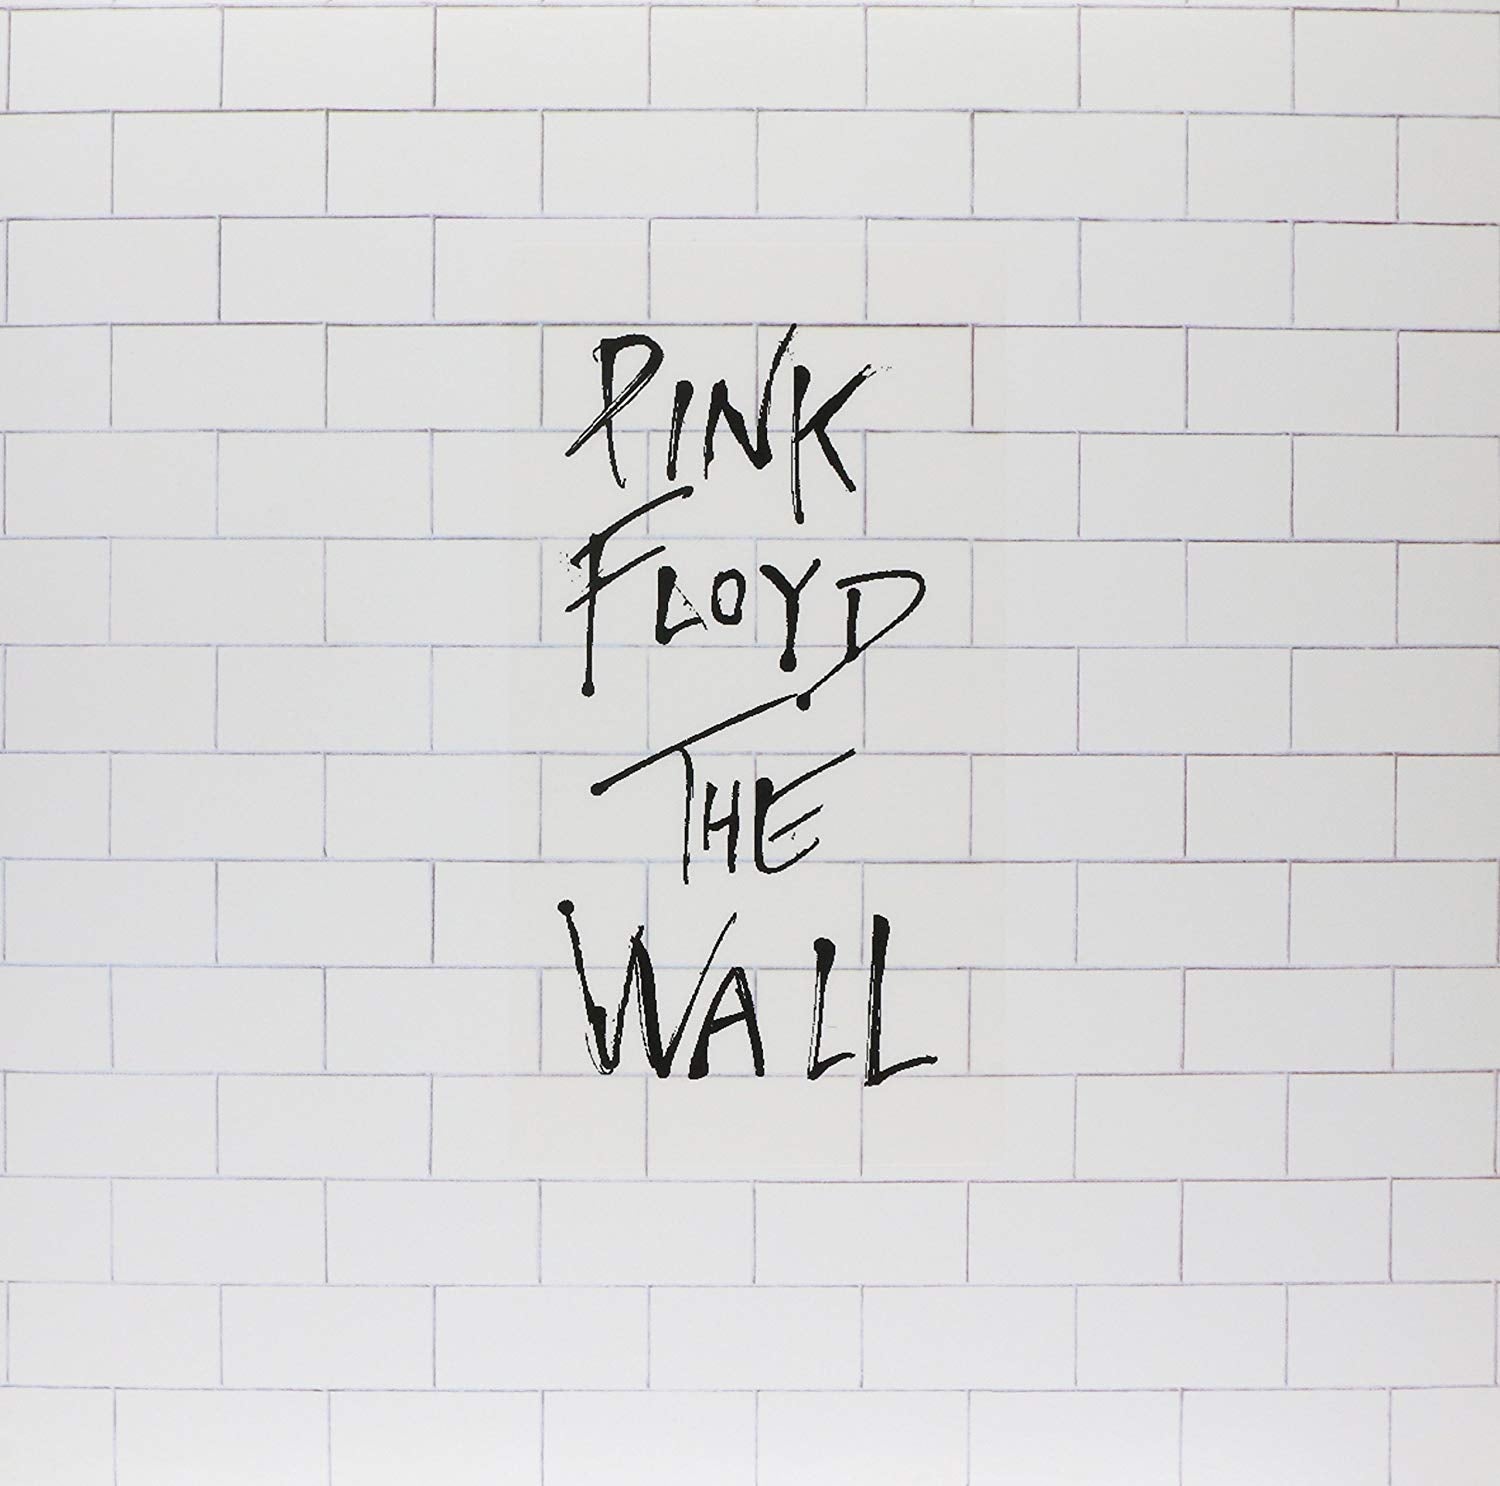 The Wall (180g)(2LP)